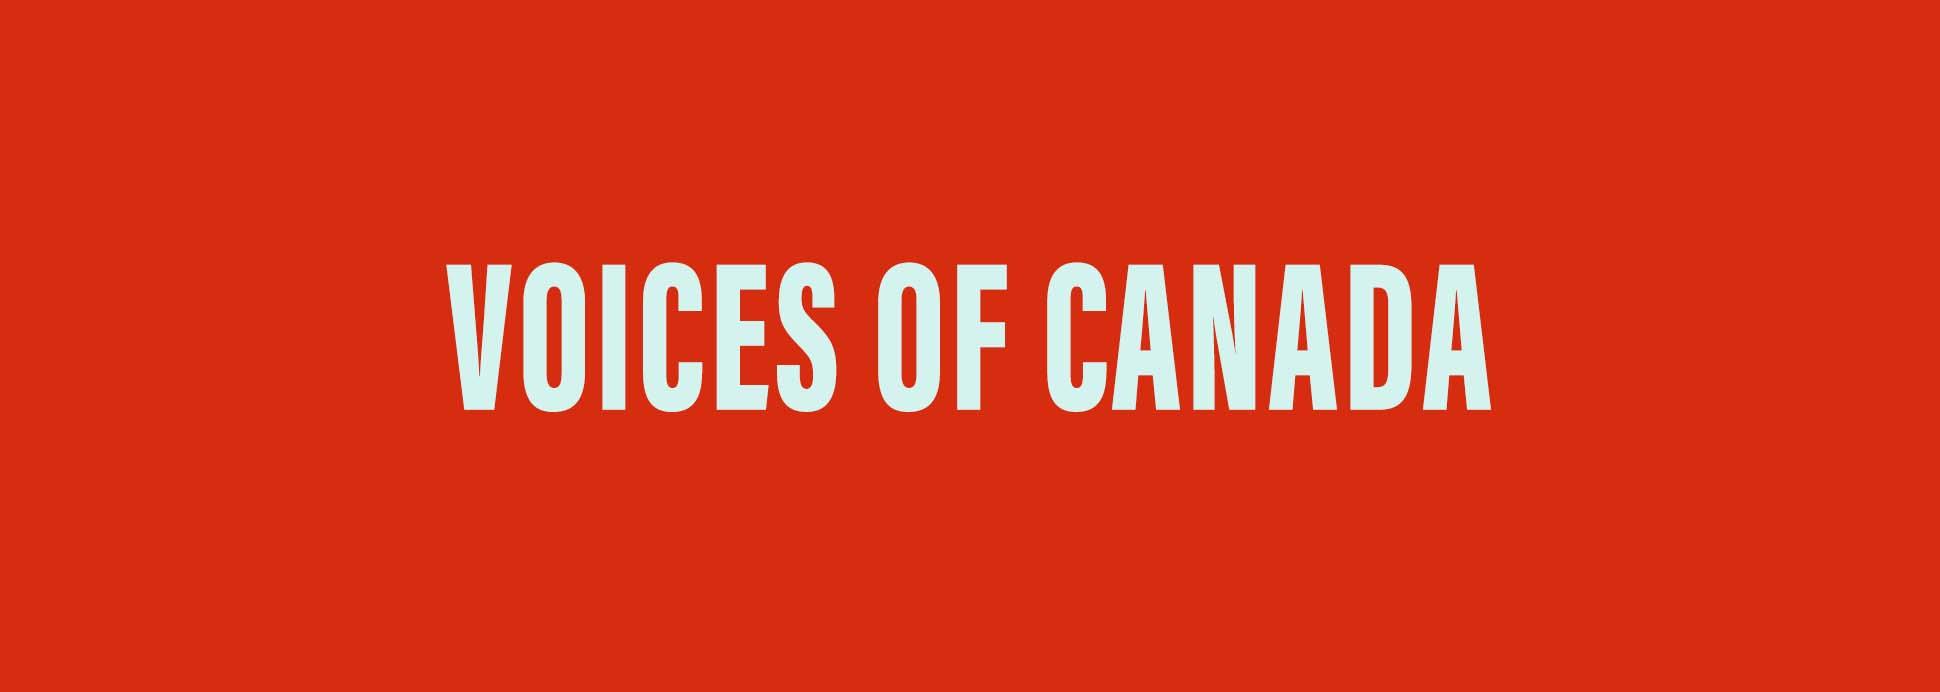 Voices of Canada